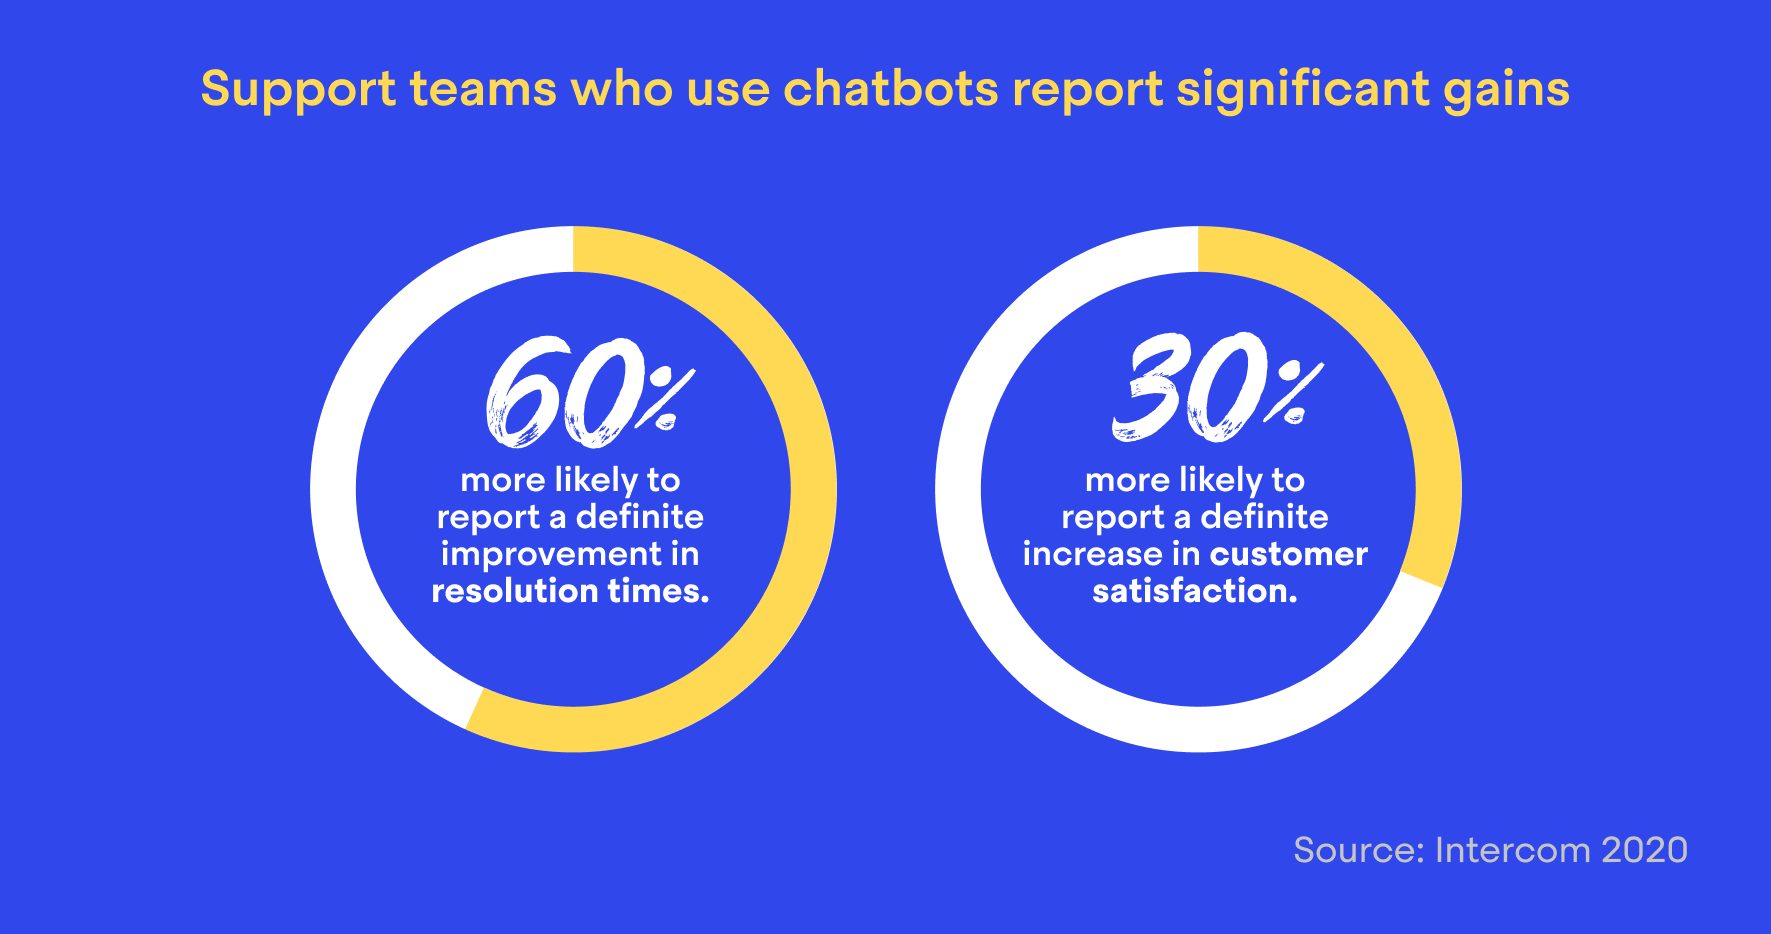 companies who use chatbots are 60% more likely to report a definite improvement in resolution times and 30% more likely to report a definite improvement in customer satisfaction